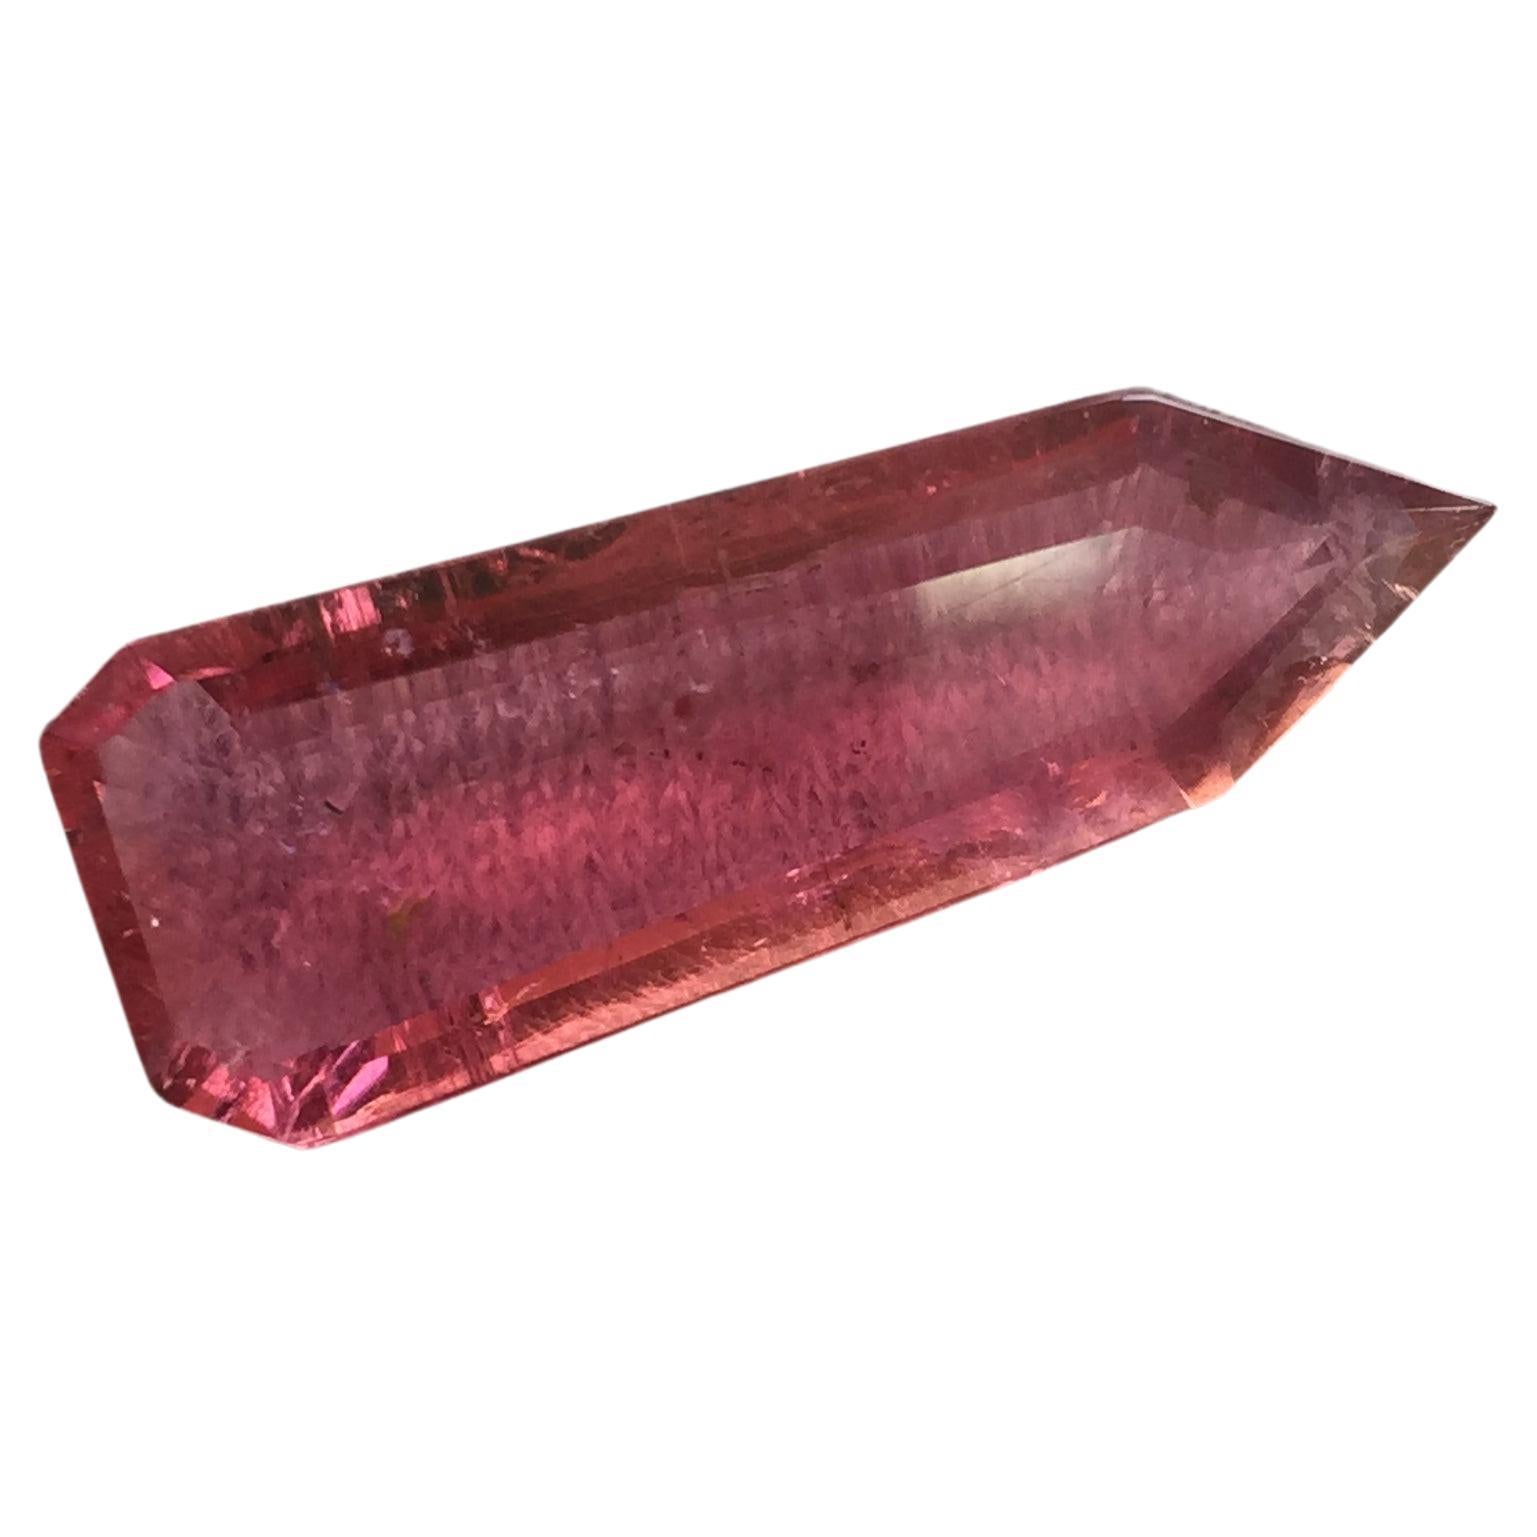 8.96 Carat Pink Tourmaline Fancy Cut for High Jewelry For Sale